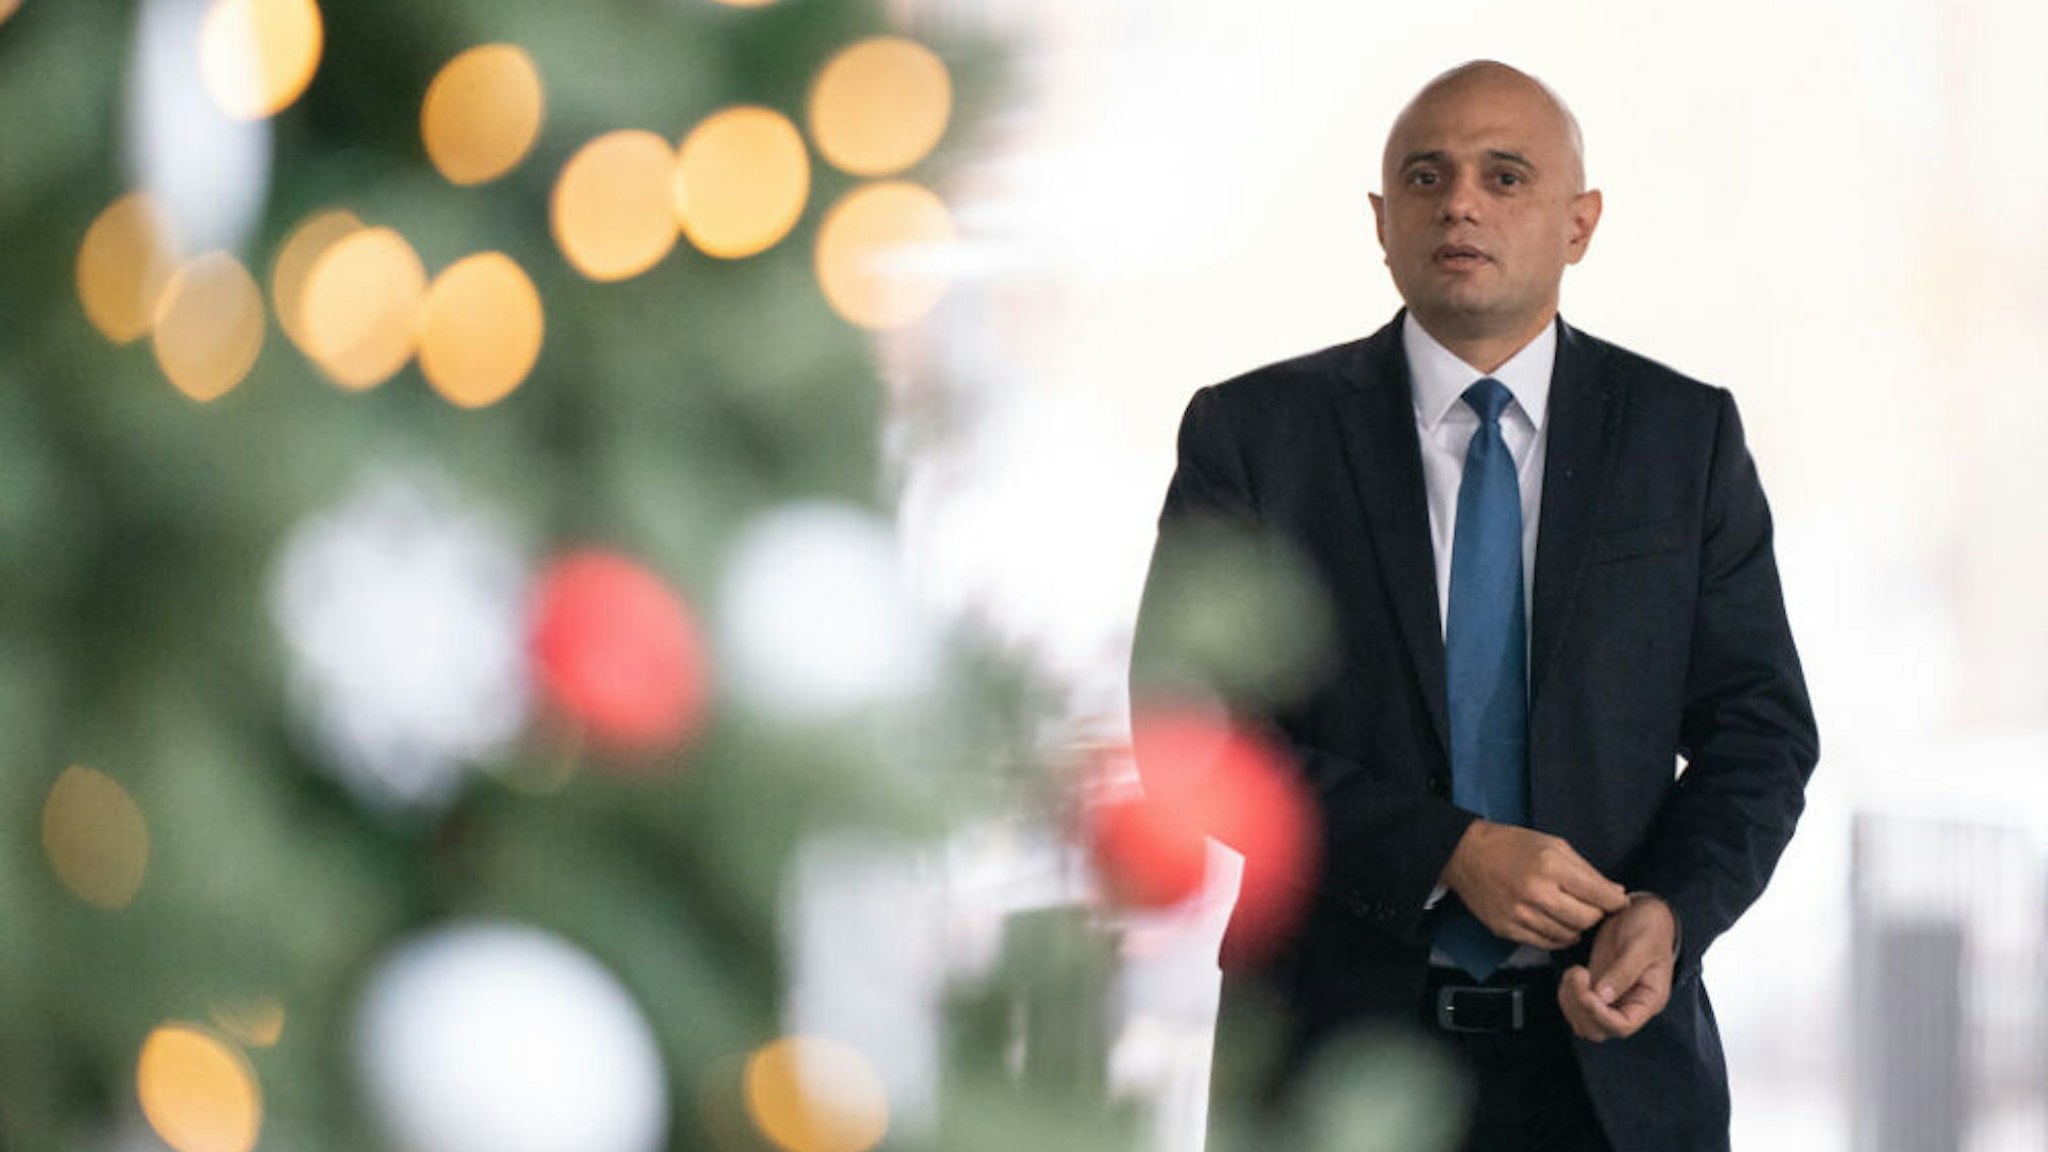 Health Secretary Sajid Javid arrives at BBC Broadcasting House, London, to appear on the last episode of the BBC1 current affairs programme, The Andrew Marr show. Picture date: Sunday December 19, 2021.